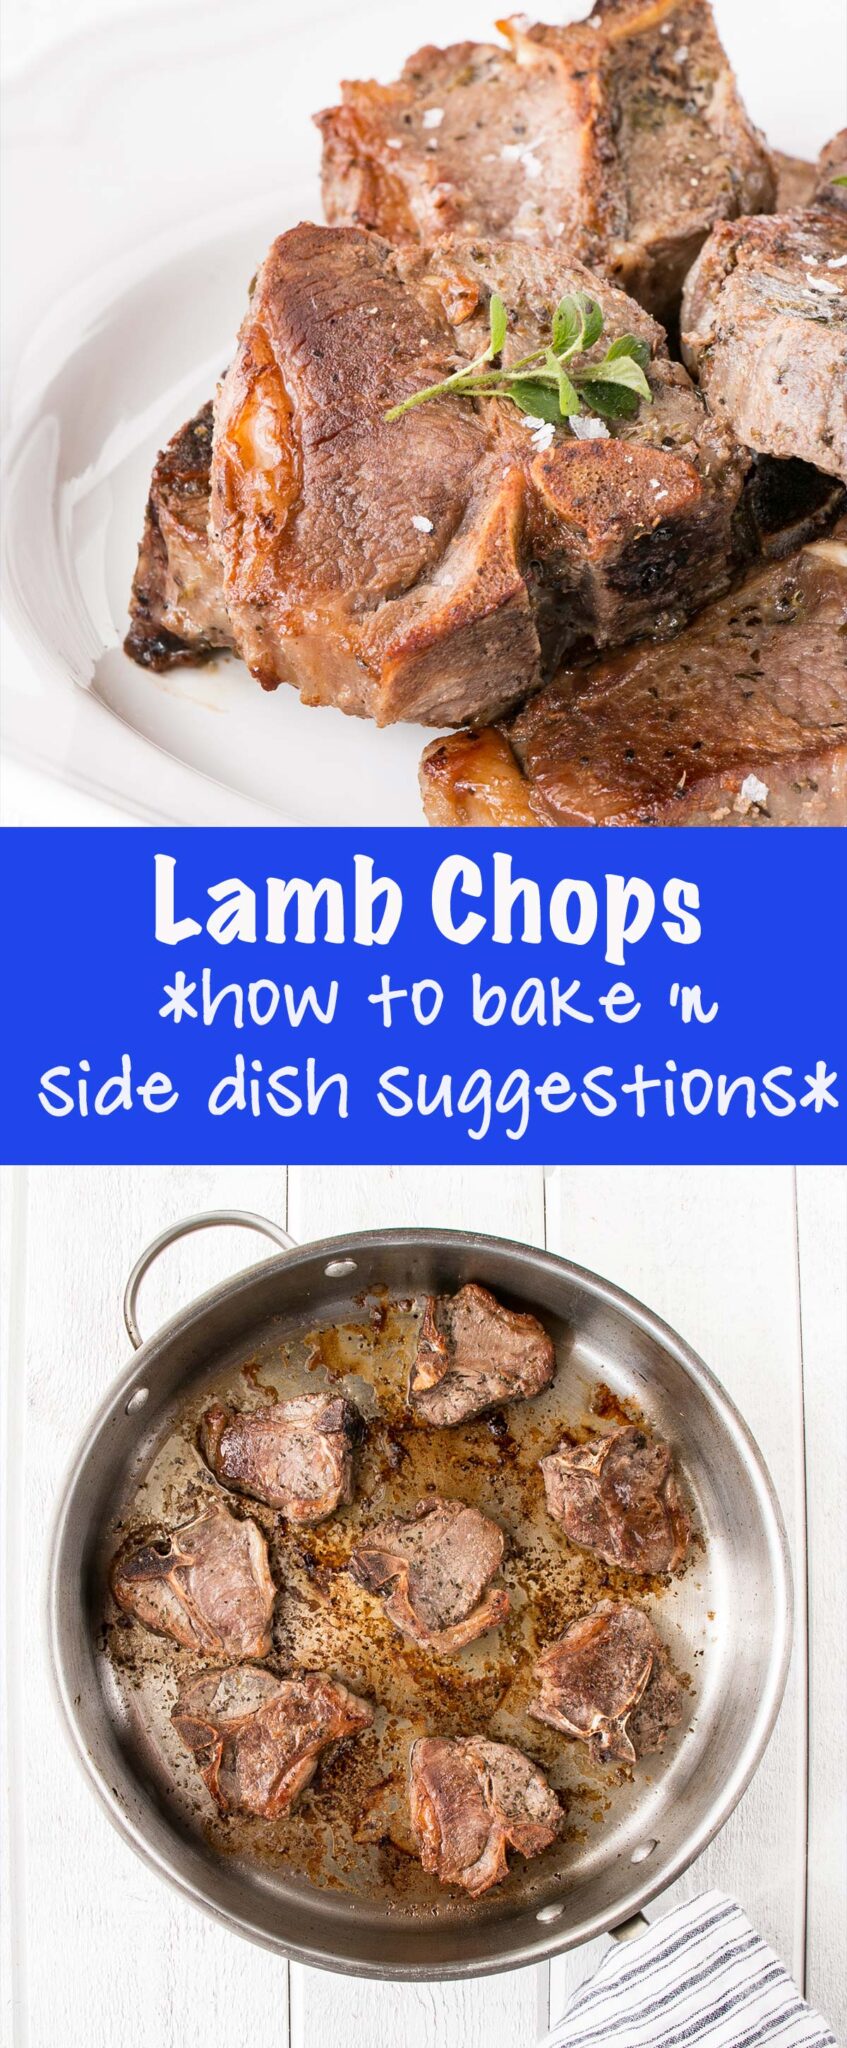 How to bake lamb chops is all about a fail-proof method to get juicy lamb chops! Bursting with flavours the entire family will love.  via @mykitchenlove